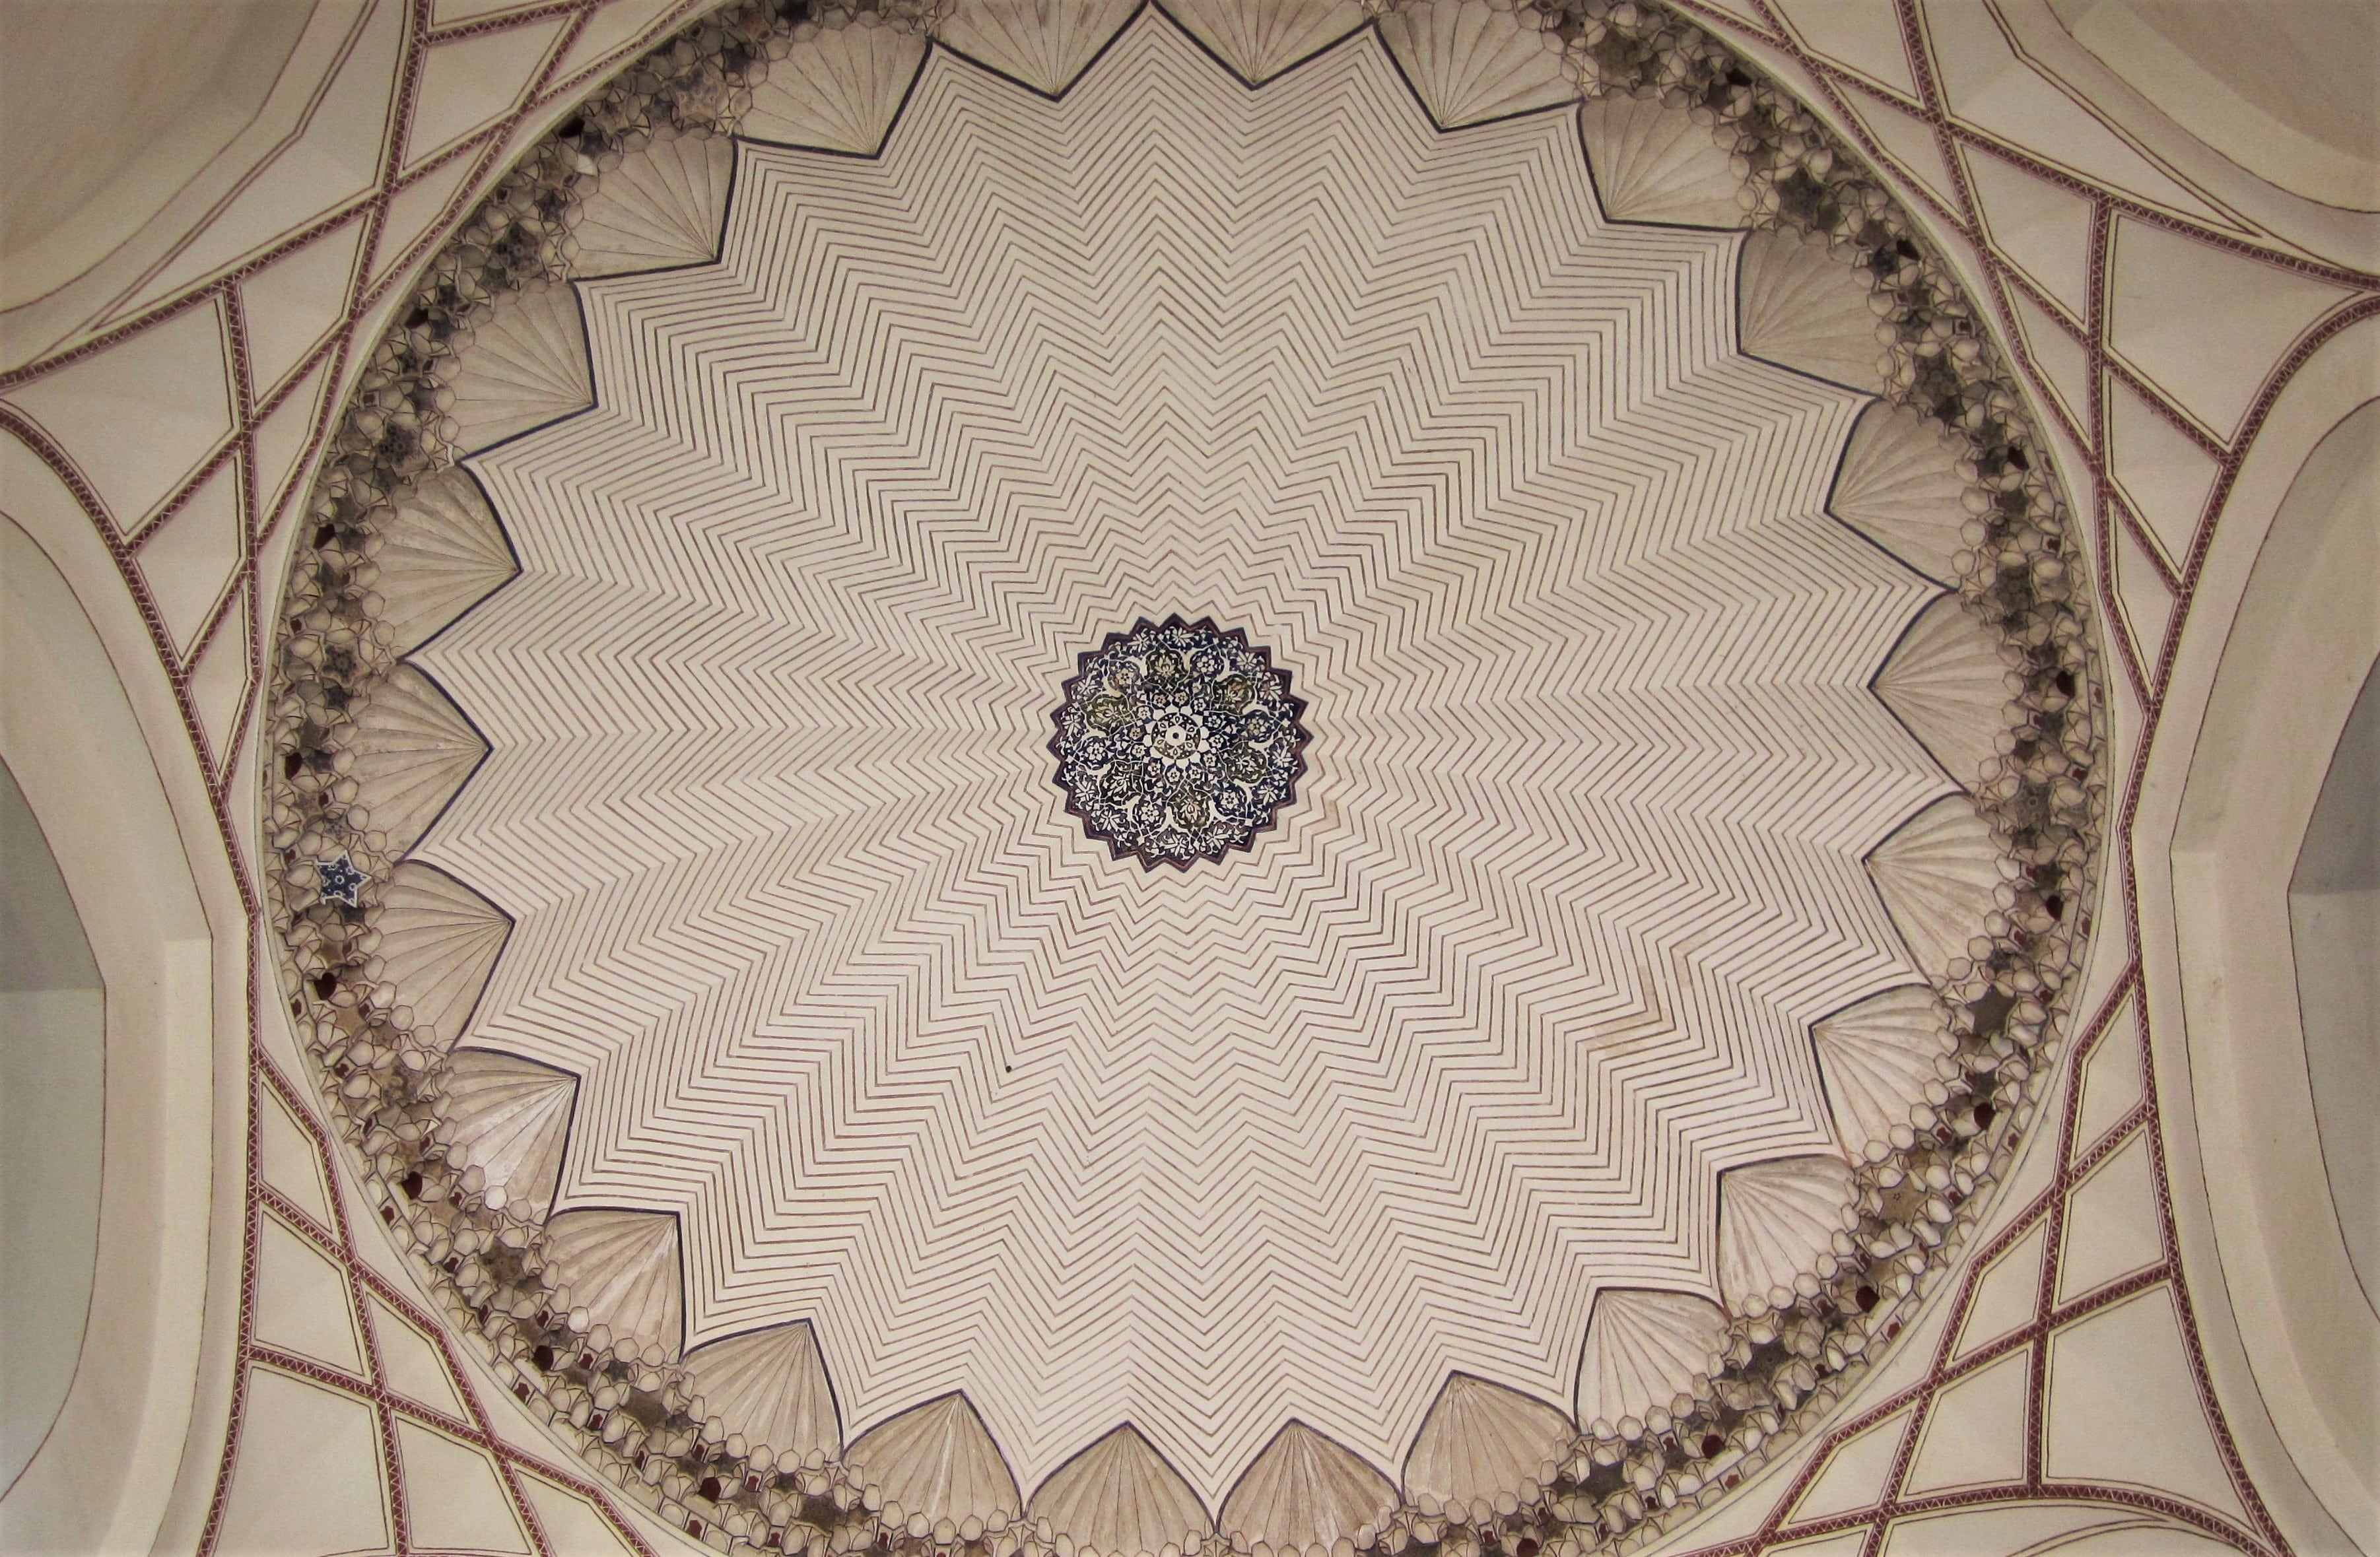 The ornate ceiling of the entrance to the Tomb chamber exemplifies the Persian attention to detail.